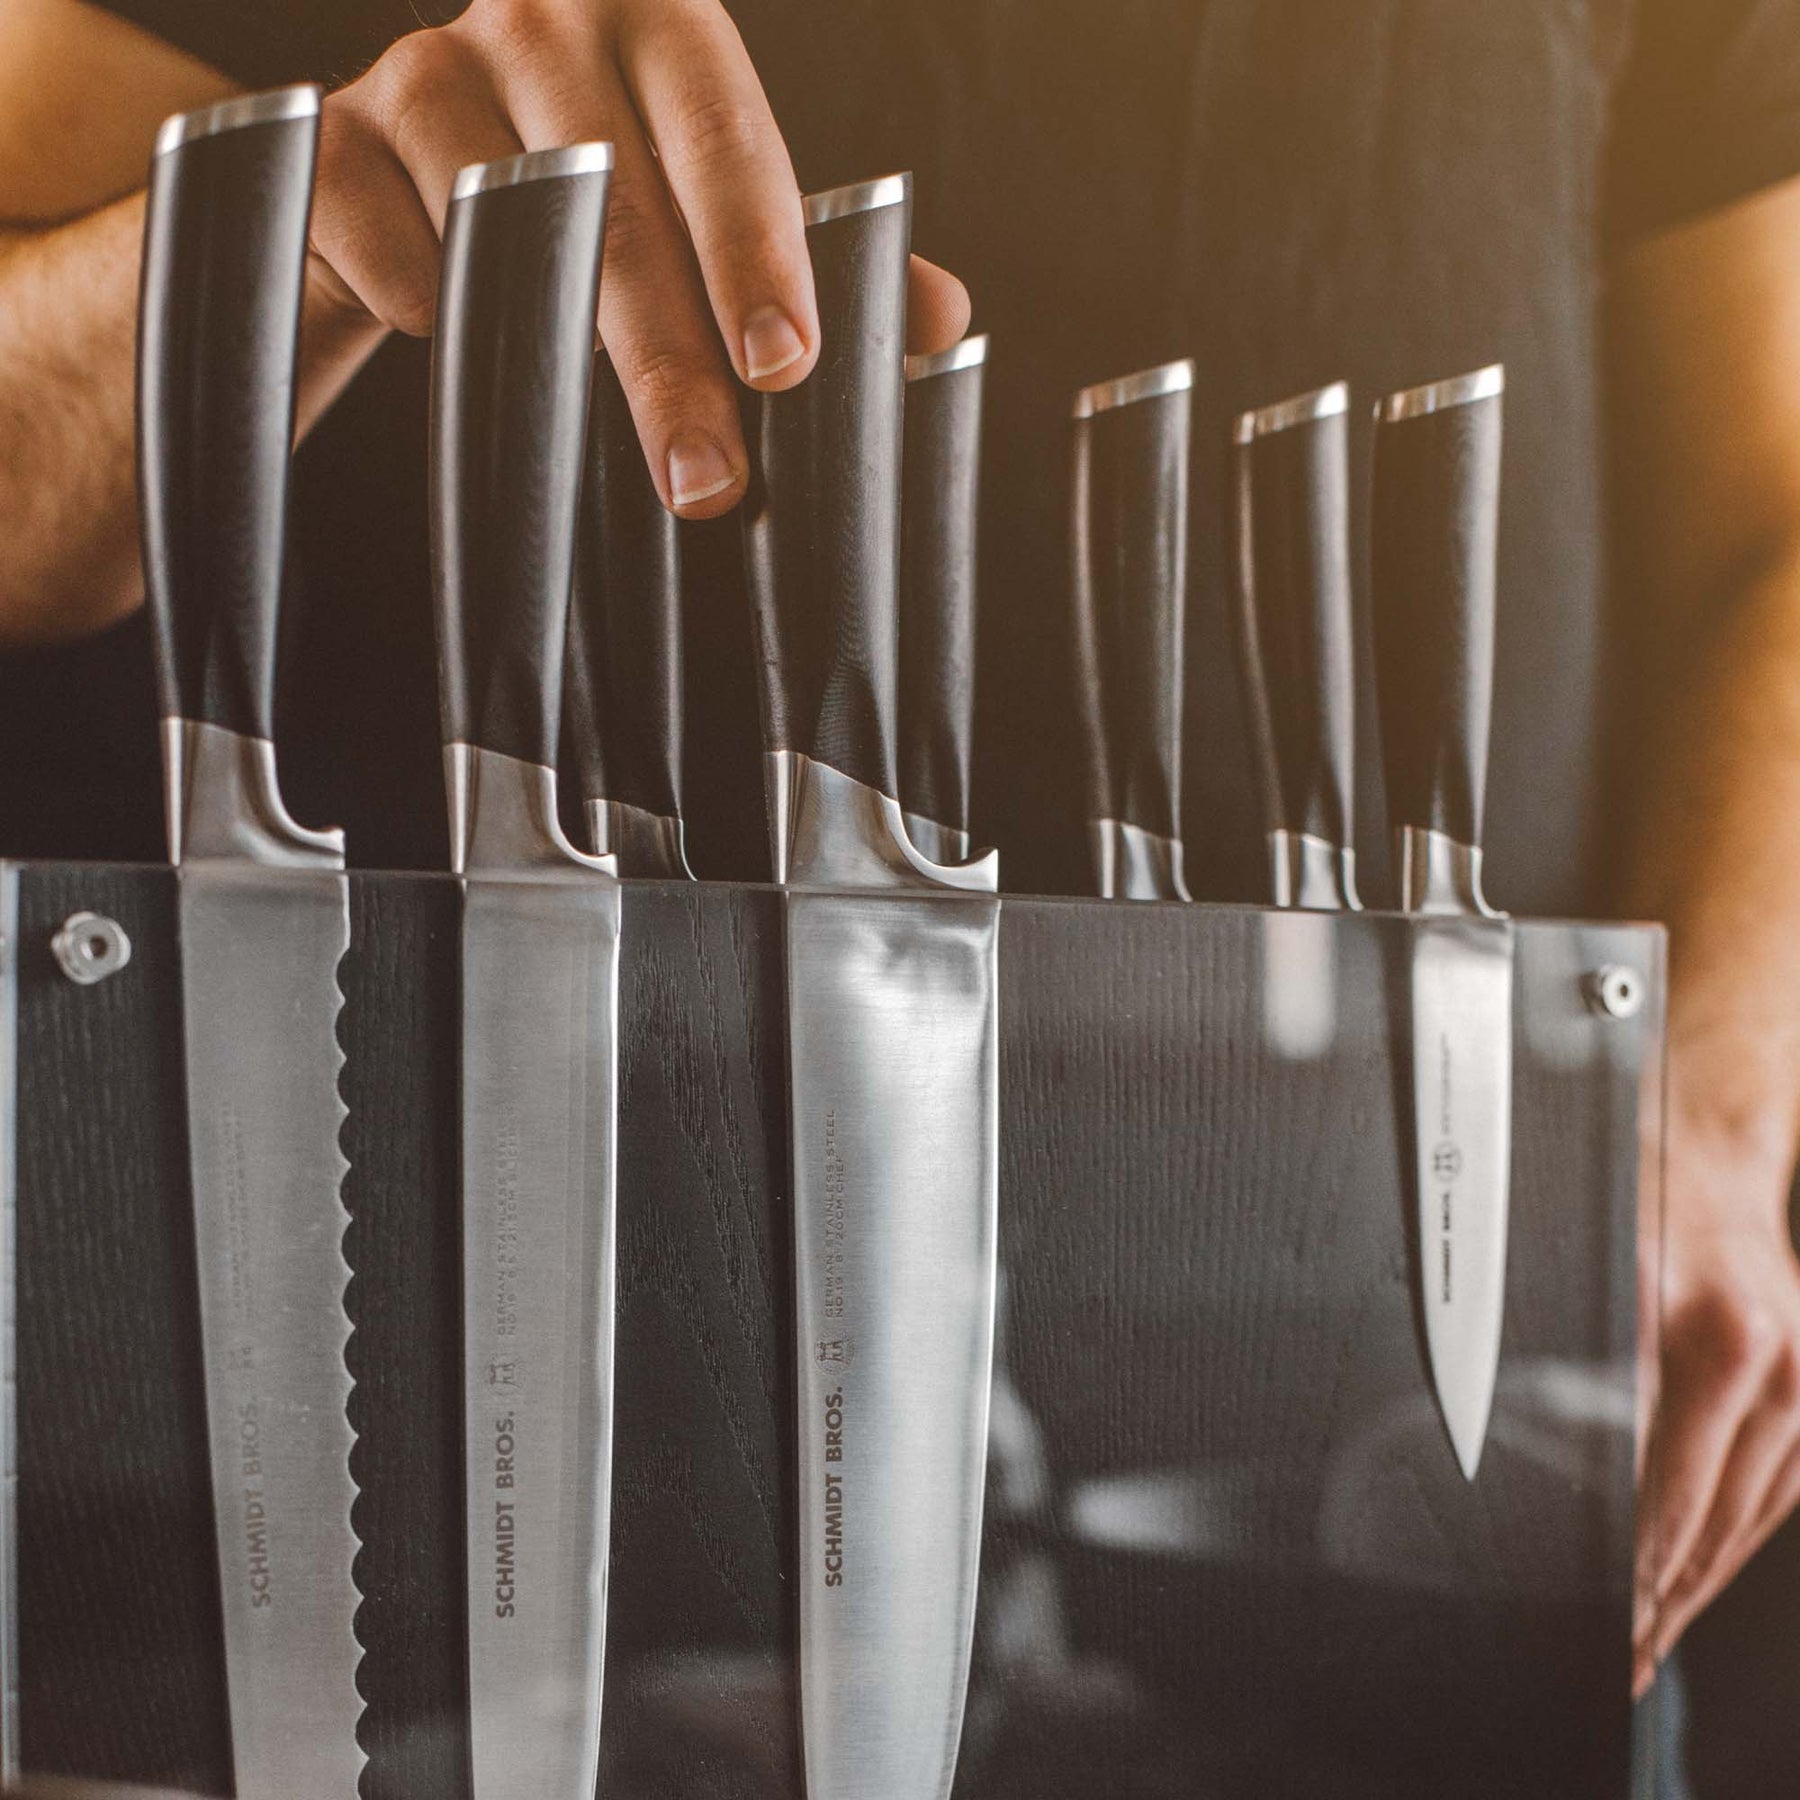 https://everlastly.com/cdn/shop/products/schmidt-brothers-kitchen-cutlery-schmidt-brothers-heritage-series-12-piece-knife-set-high-carbon-stainless-steel-cutlery-and-acrylic-magnetic-knife-block-28378211713085_1800x1800_e02acbcd-1364-4e5d-9f77-9c17965e3d2d.jpg?v=1678298747